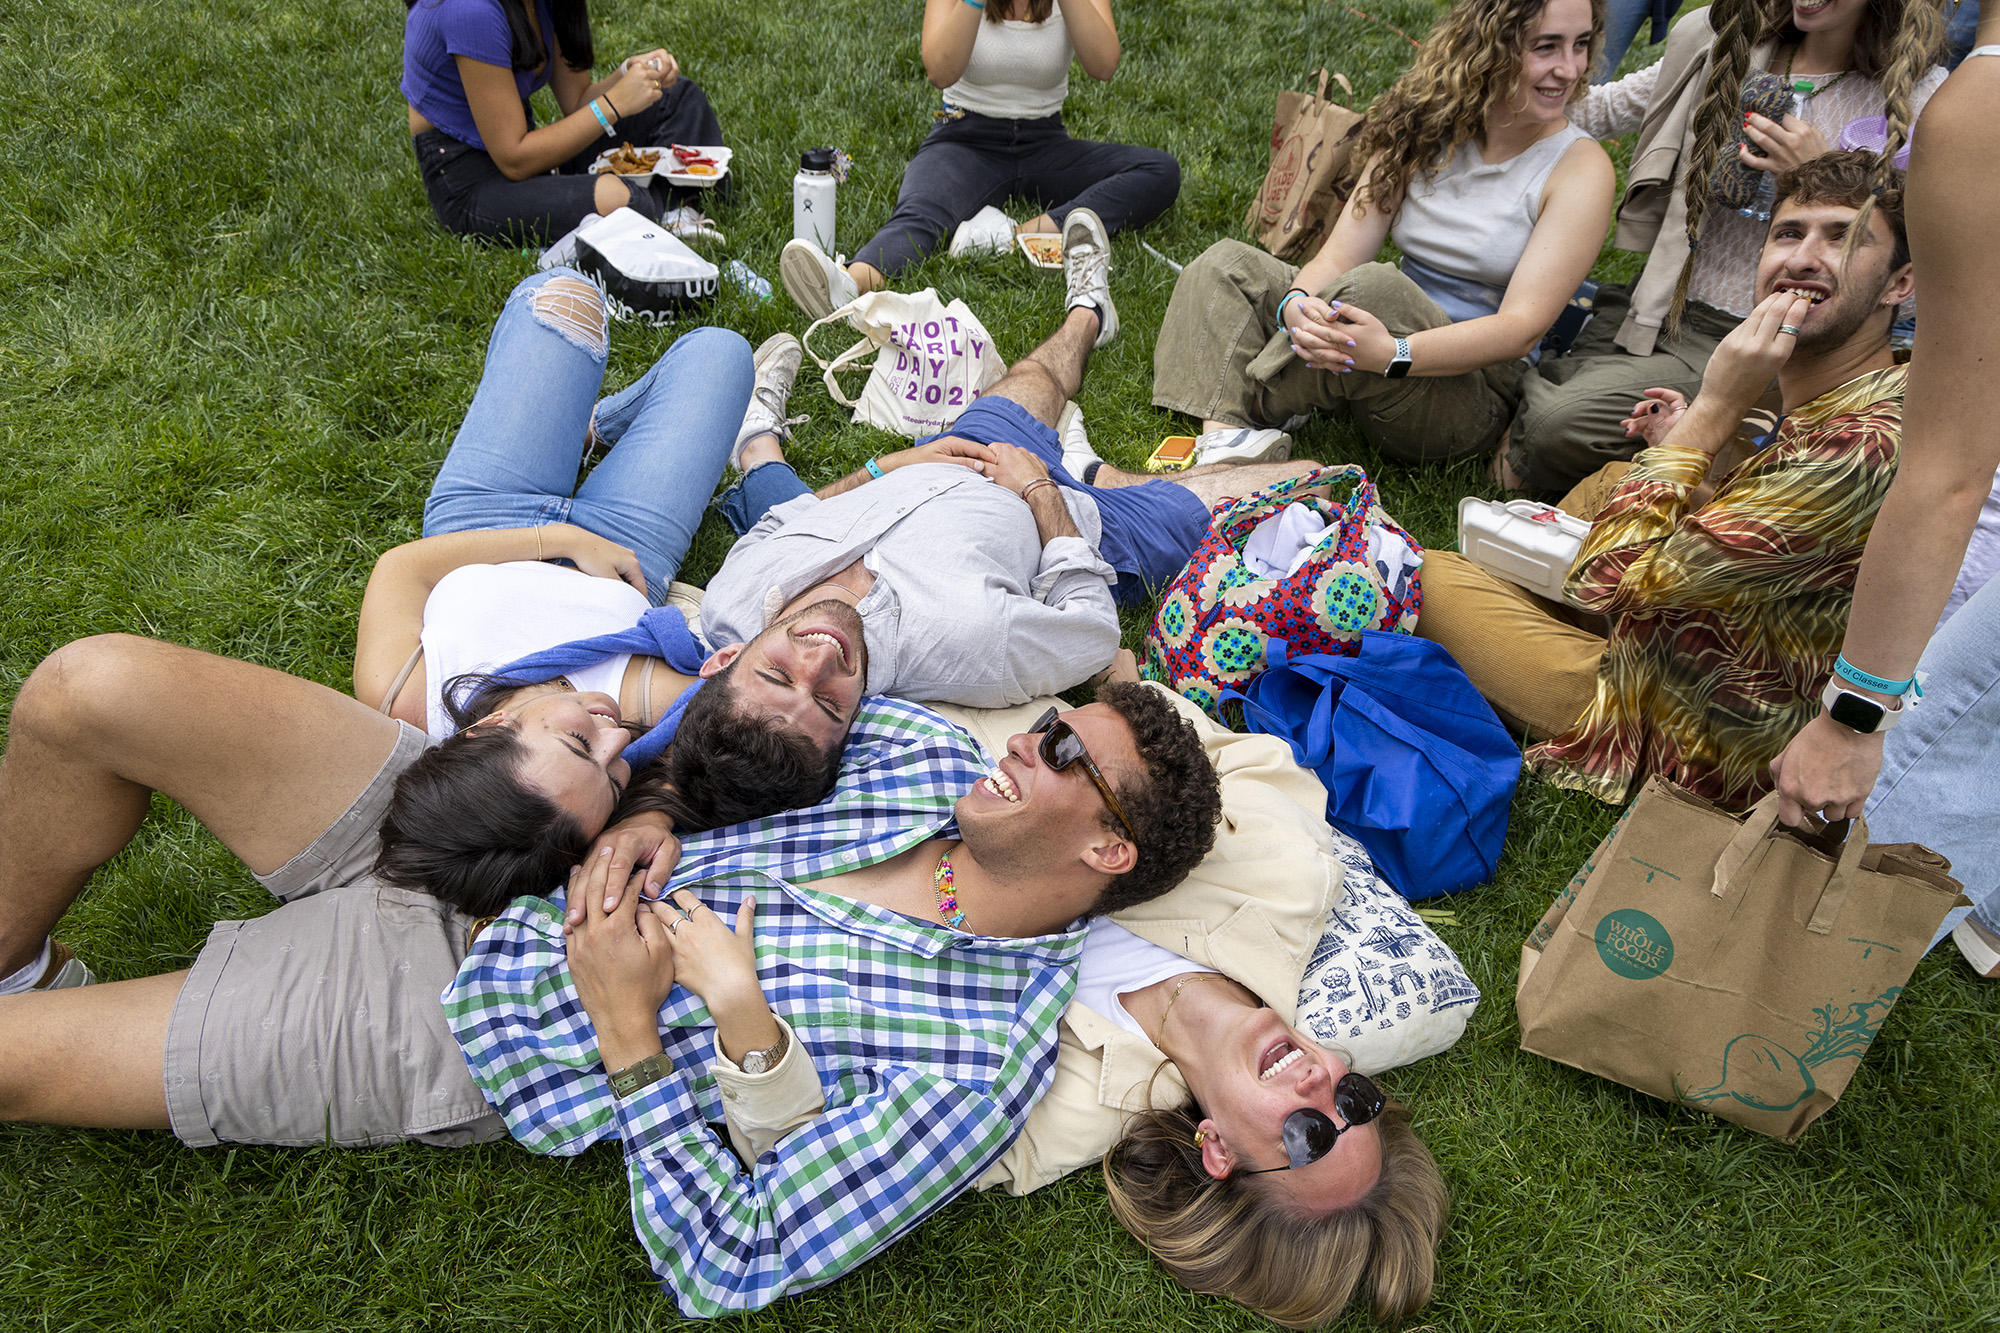 Seniors Nancy Beaujeu-Dufour, Ian Acriche, Chase Pellegrini de Paur and Lana Gesinsky lay on the grass together on the Abele Quad lawn. 